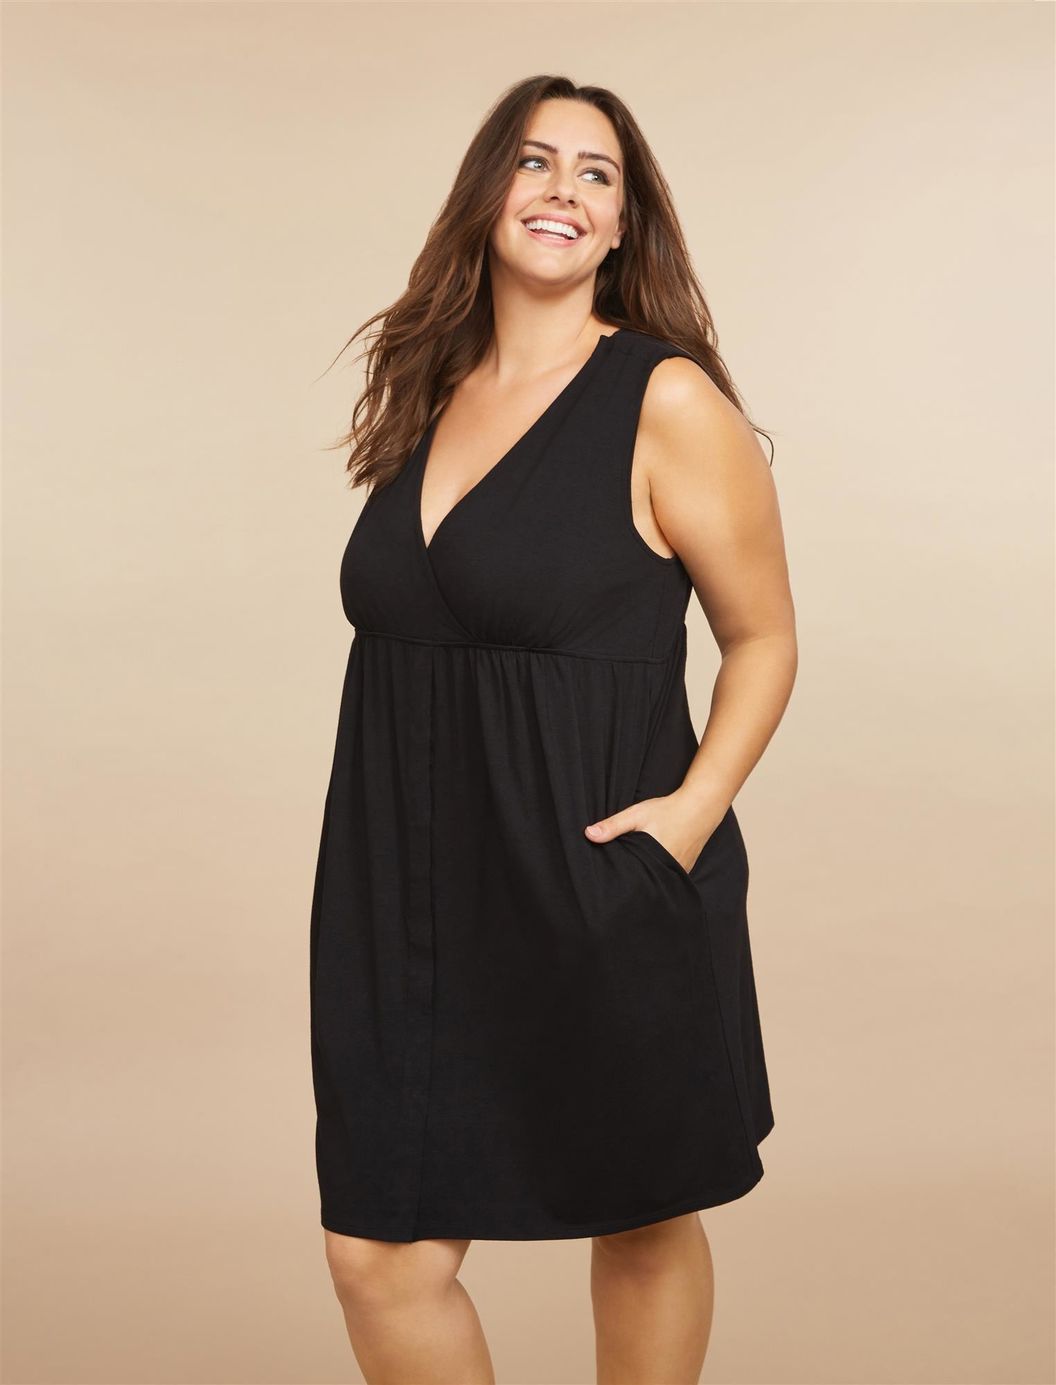 Plus Size 3 In 1 Labor, Delivery And Nursing Gown